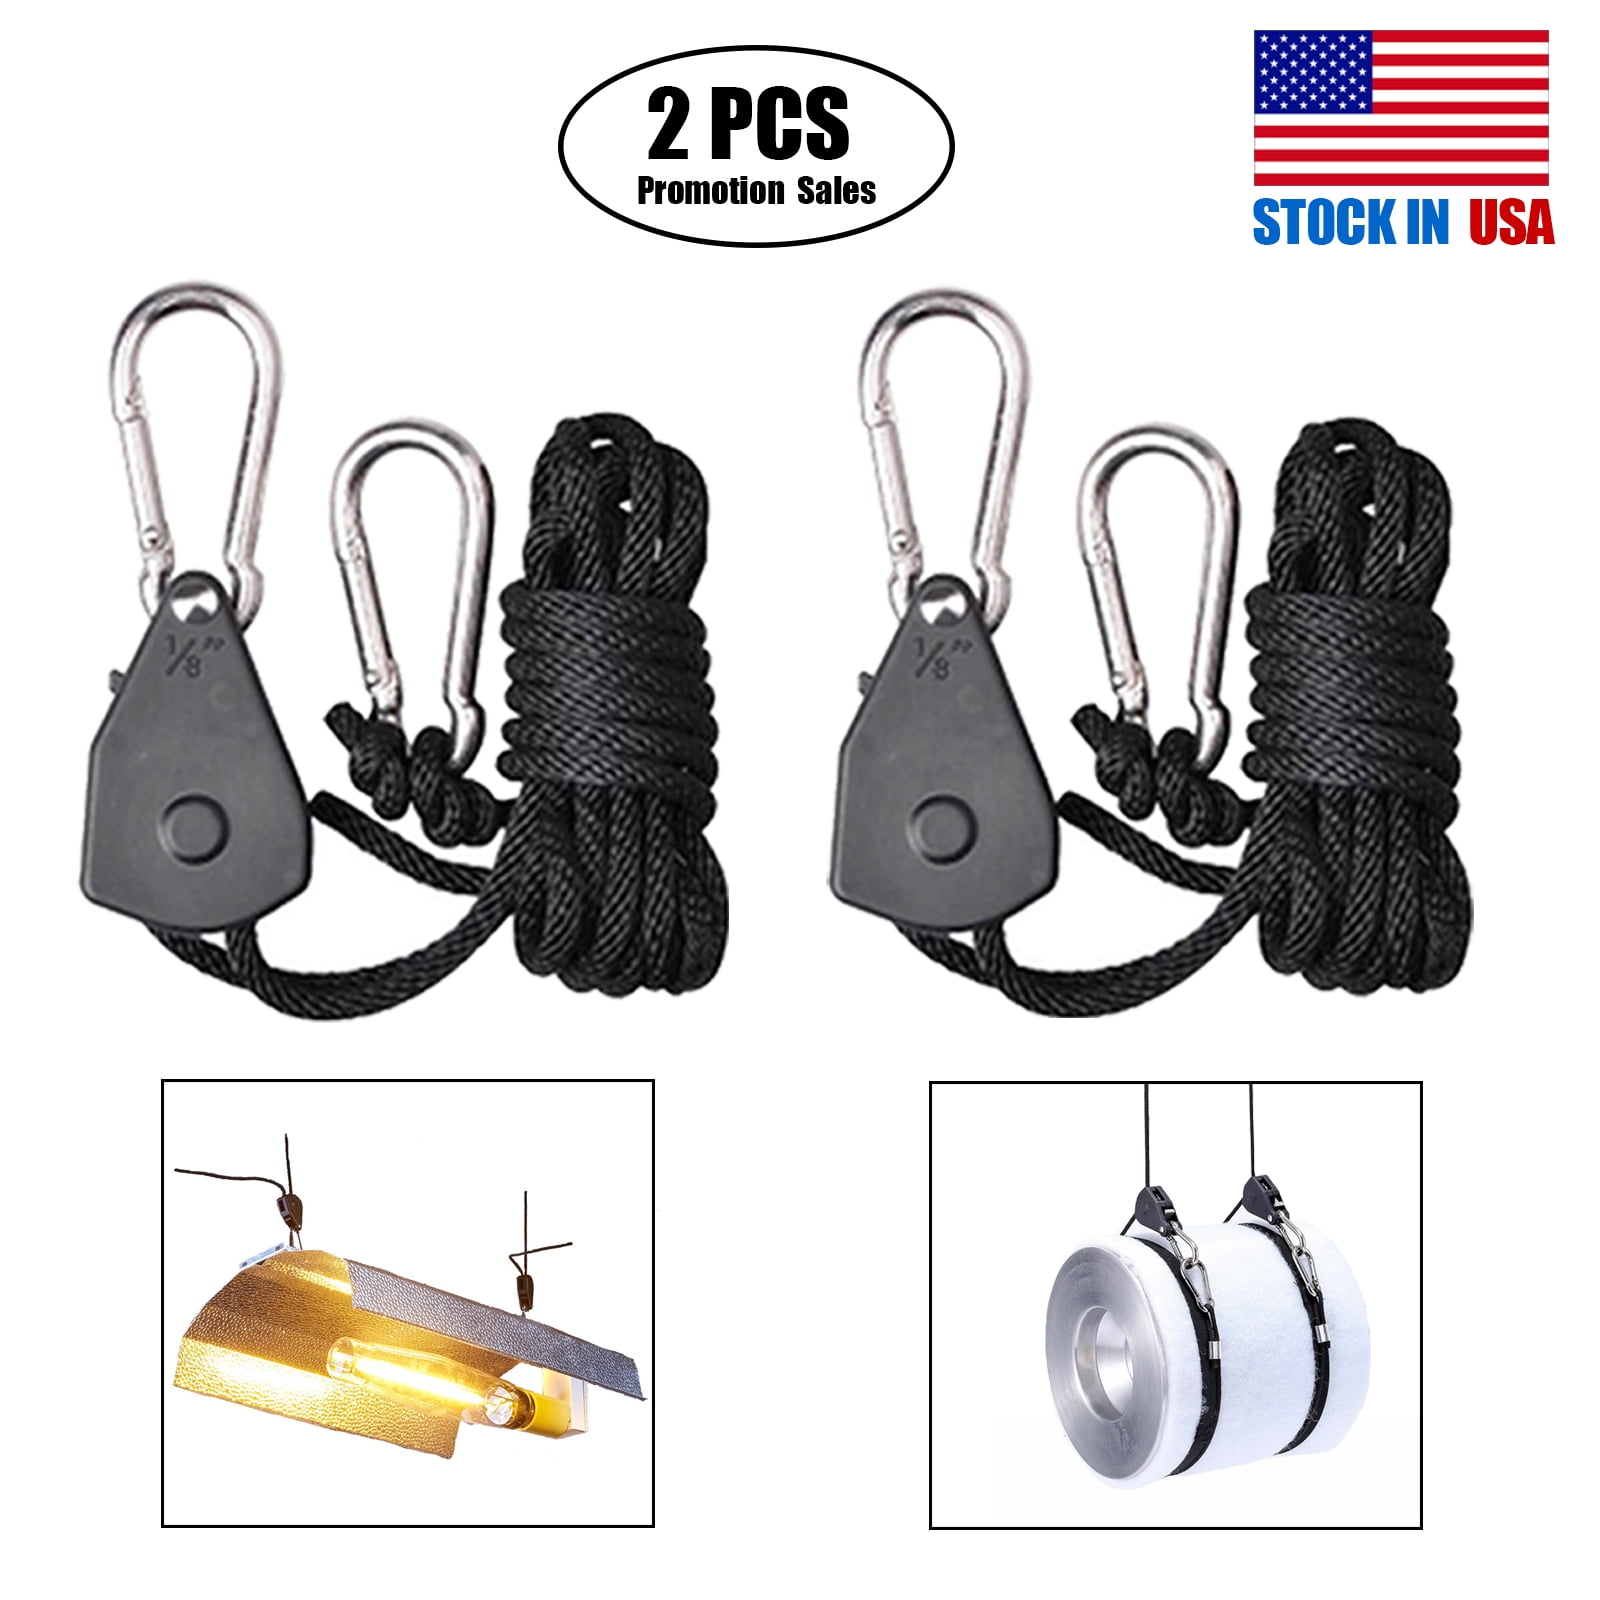 2pcs/pack 1/8 Inches rope ratchet reflector grow light hangers light lifters!E 